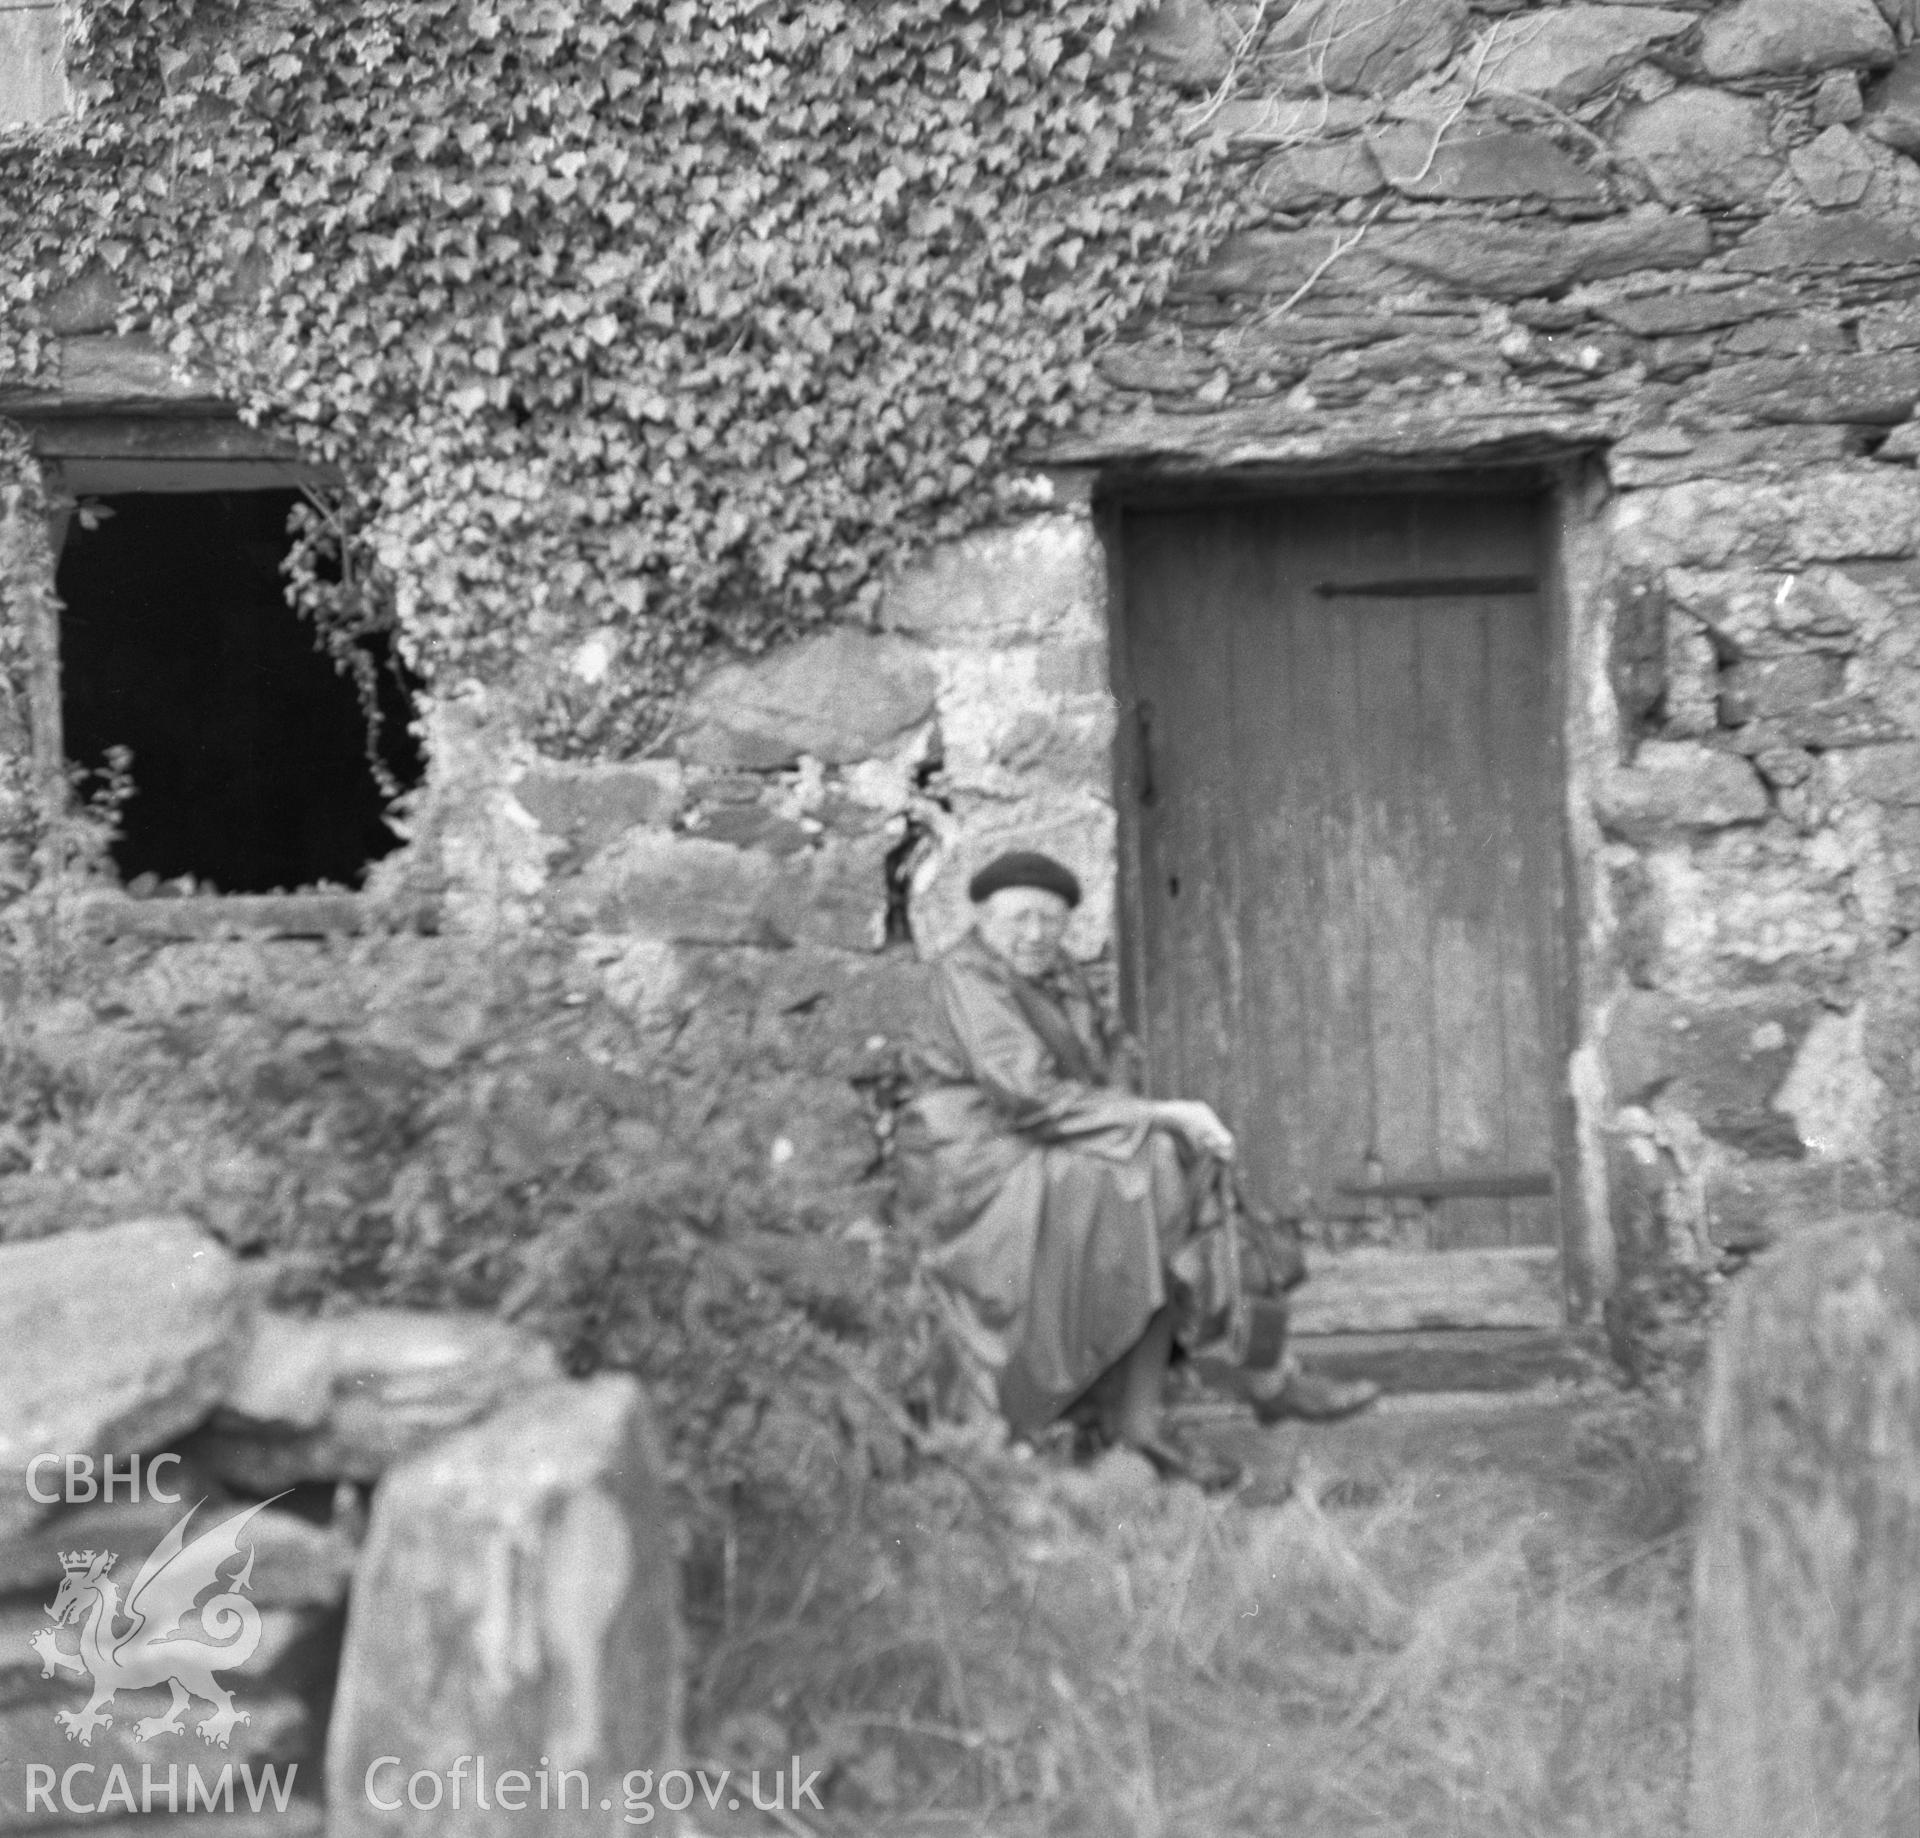 Digital copy of an undated nitrate negative showing a view of the entrance to Coed Mawr with figure.